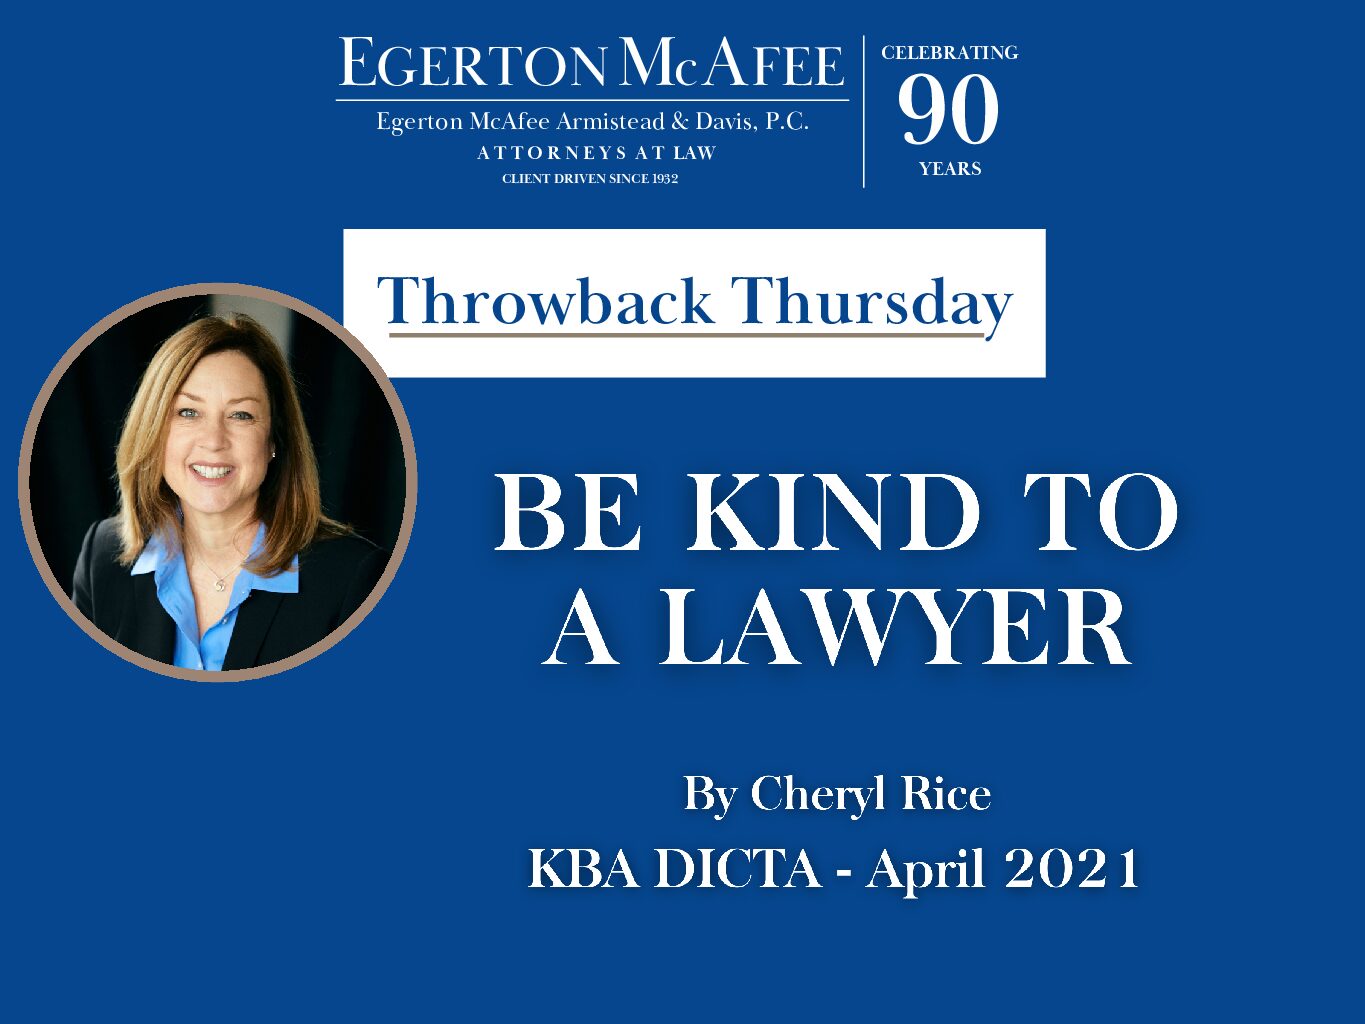 Throwback Thursday – BE KIND TO A LAWYER by Cheryl Rice